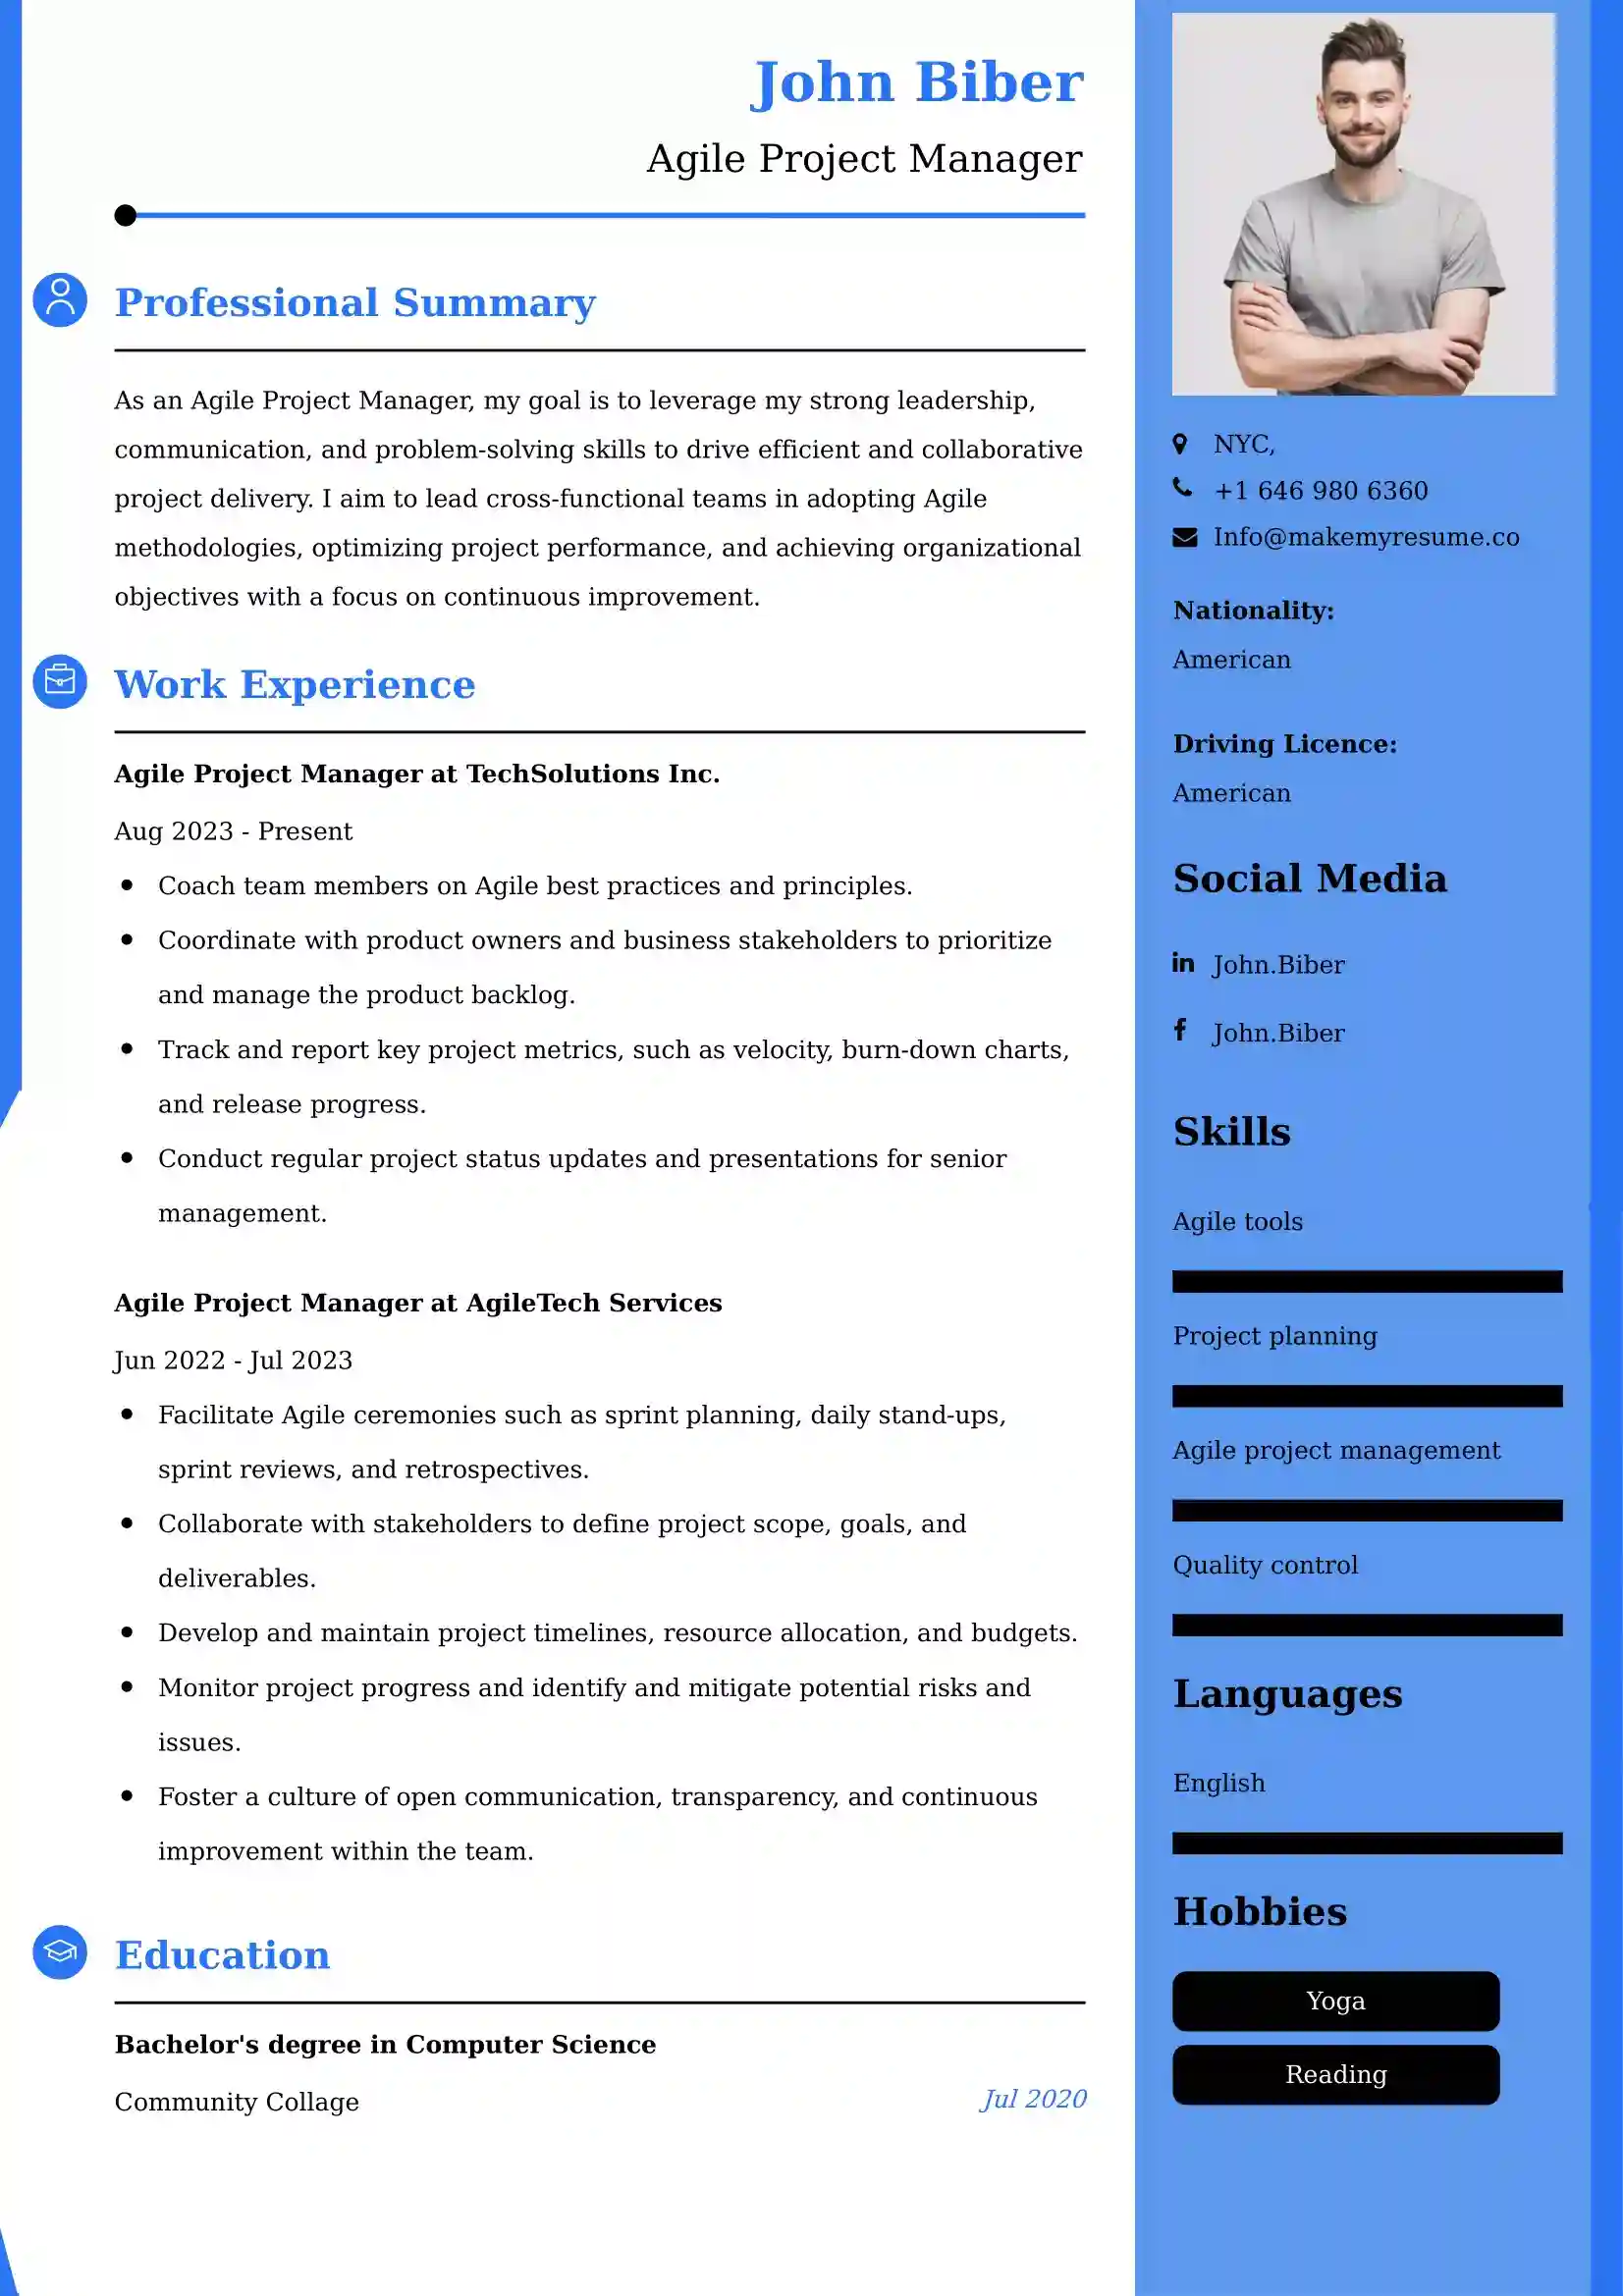 Agile Project Manager Resume Examples - UAE Format and Tips.